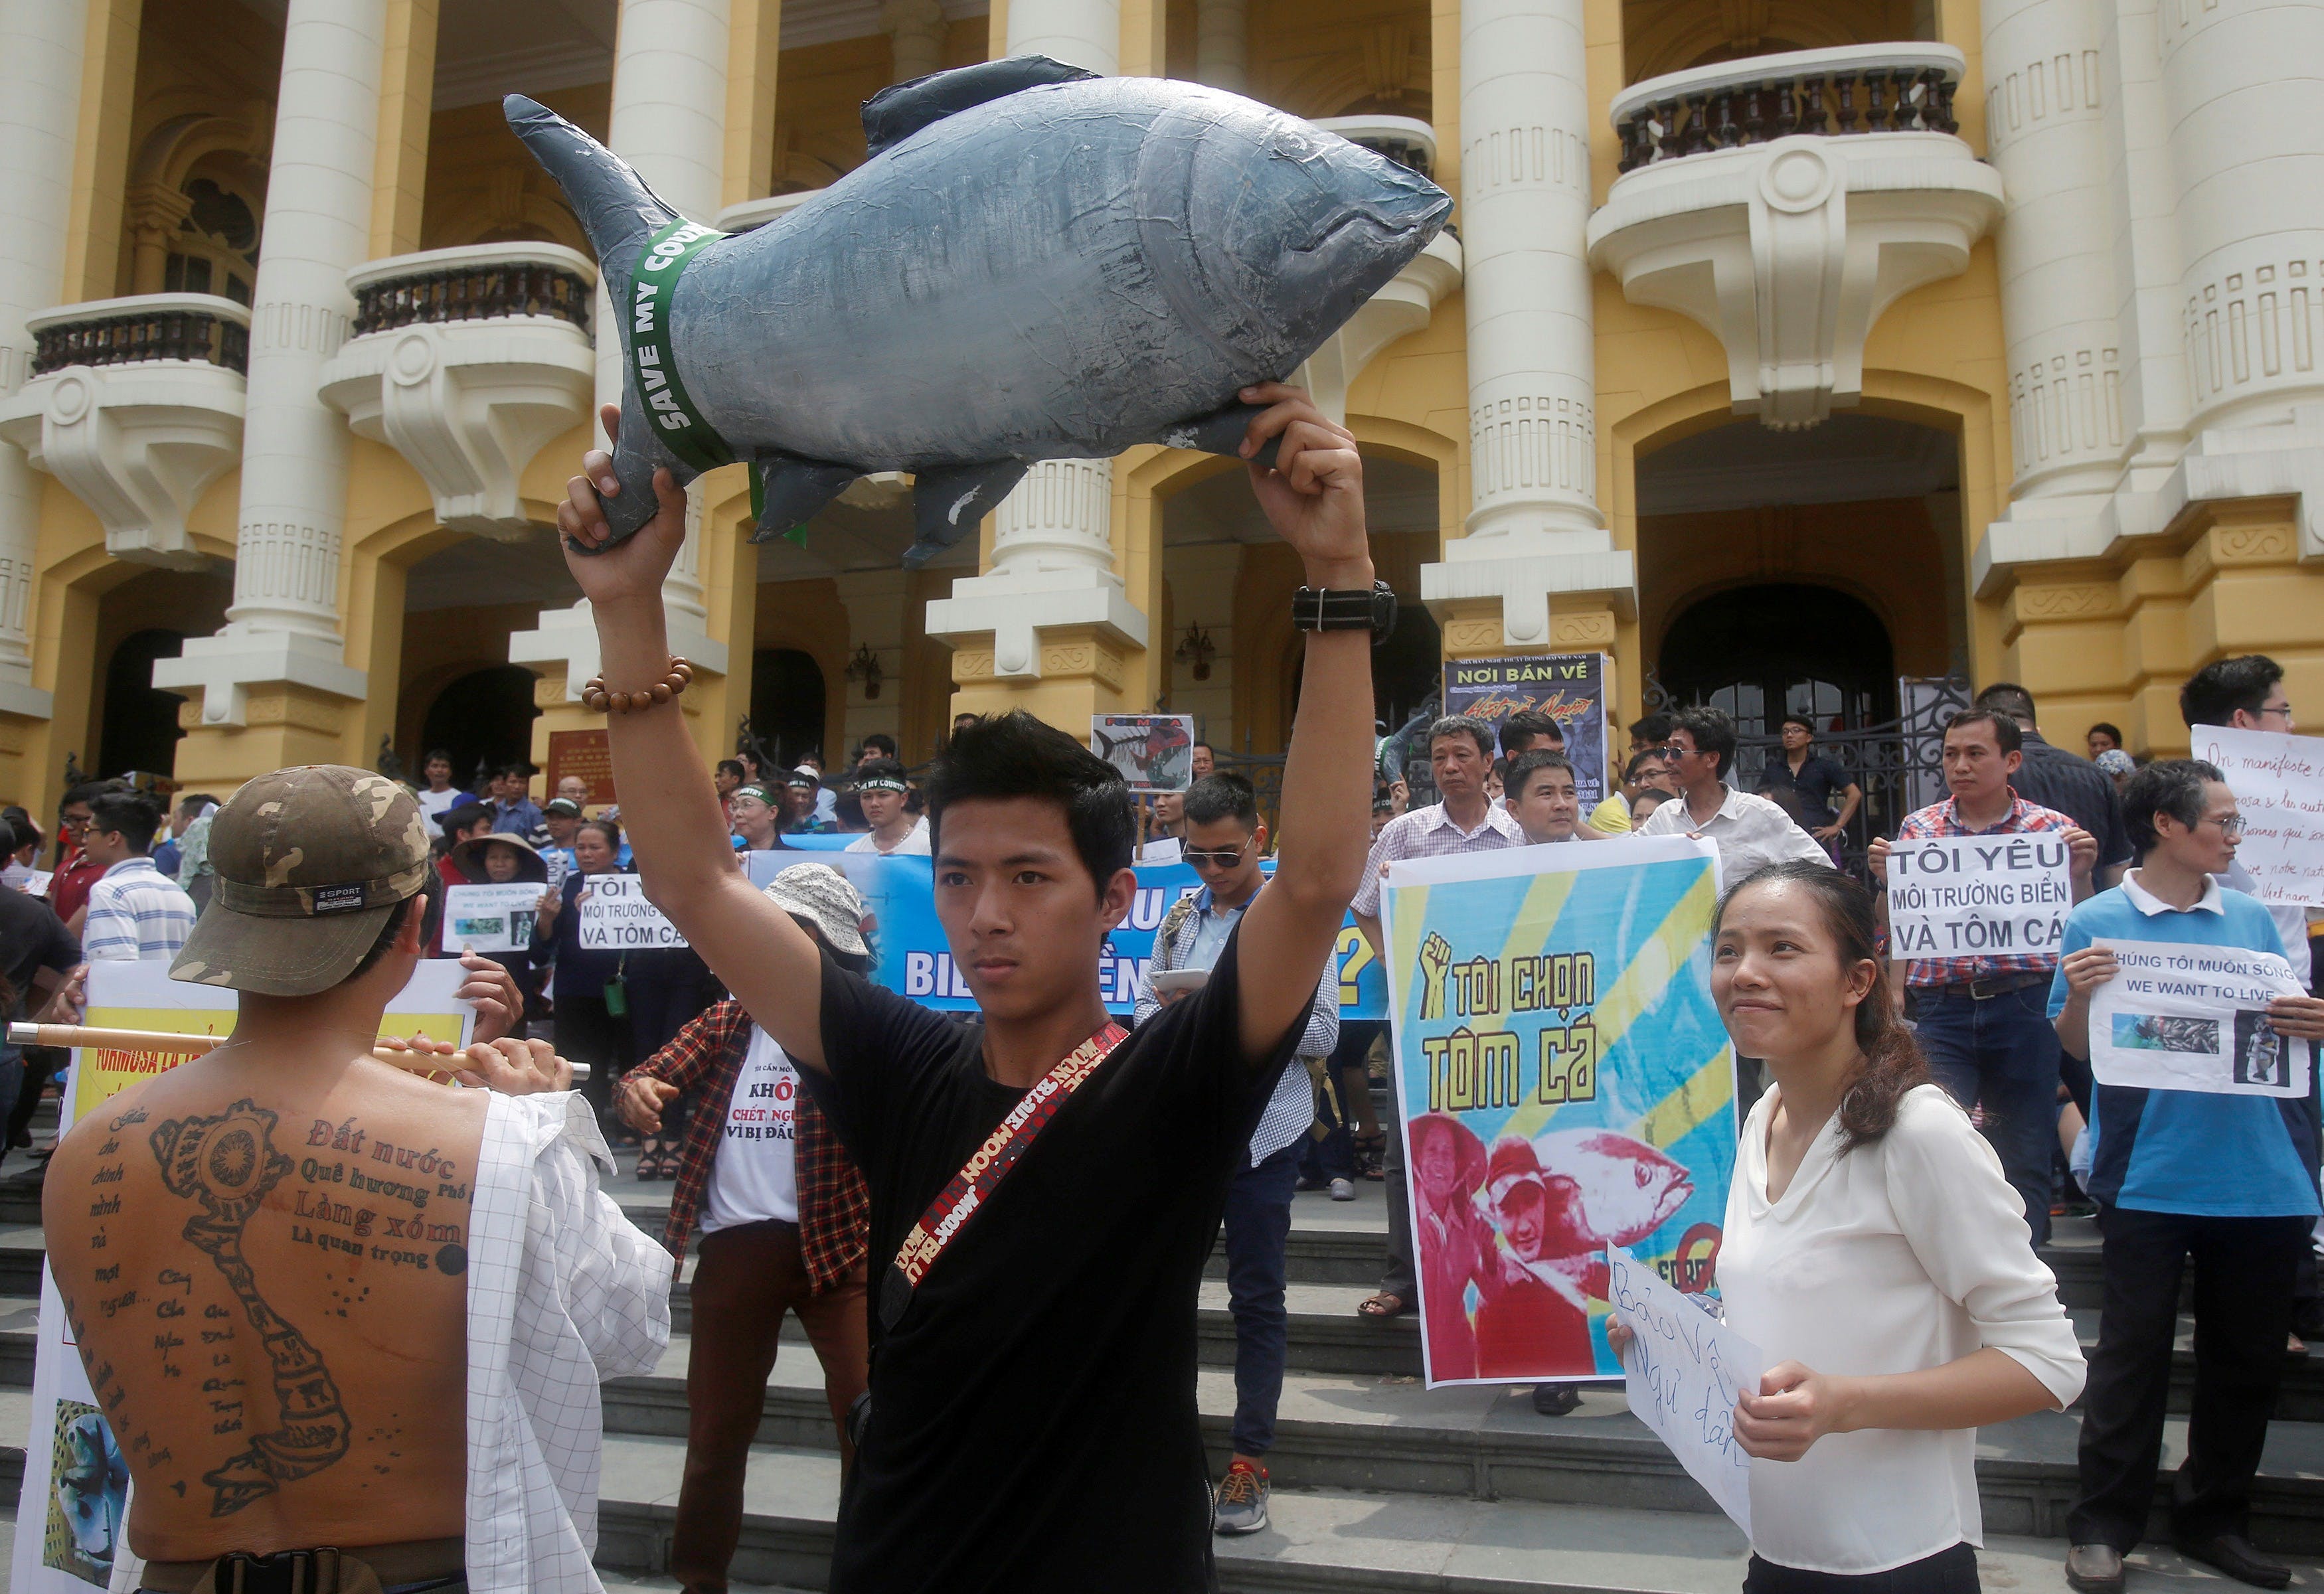 Demonstrators, holding signs of environmental-friendly messages, say they are demanding cleaner waters in the central regions after mass fish deaths in recent weeks, in Hanoi, Vietnam